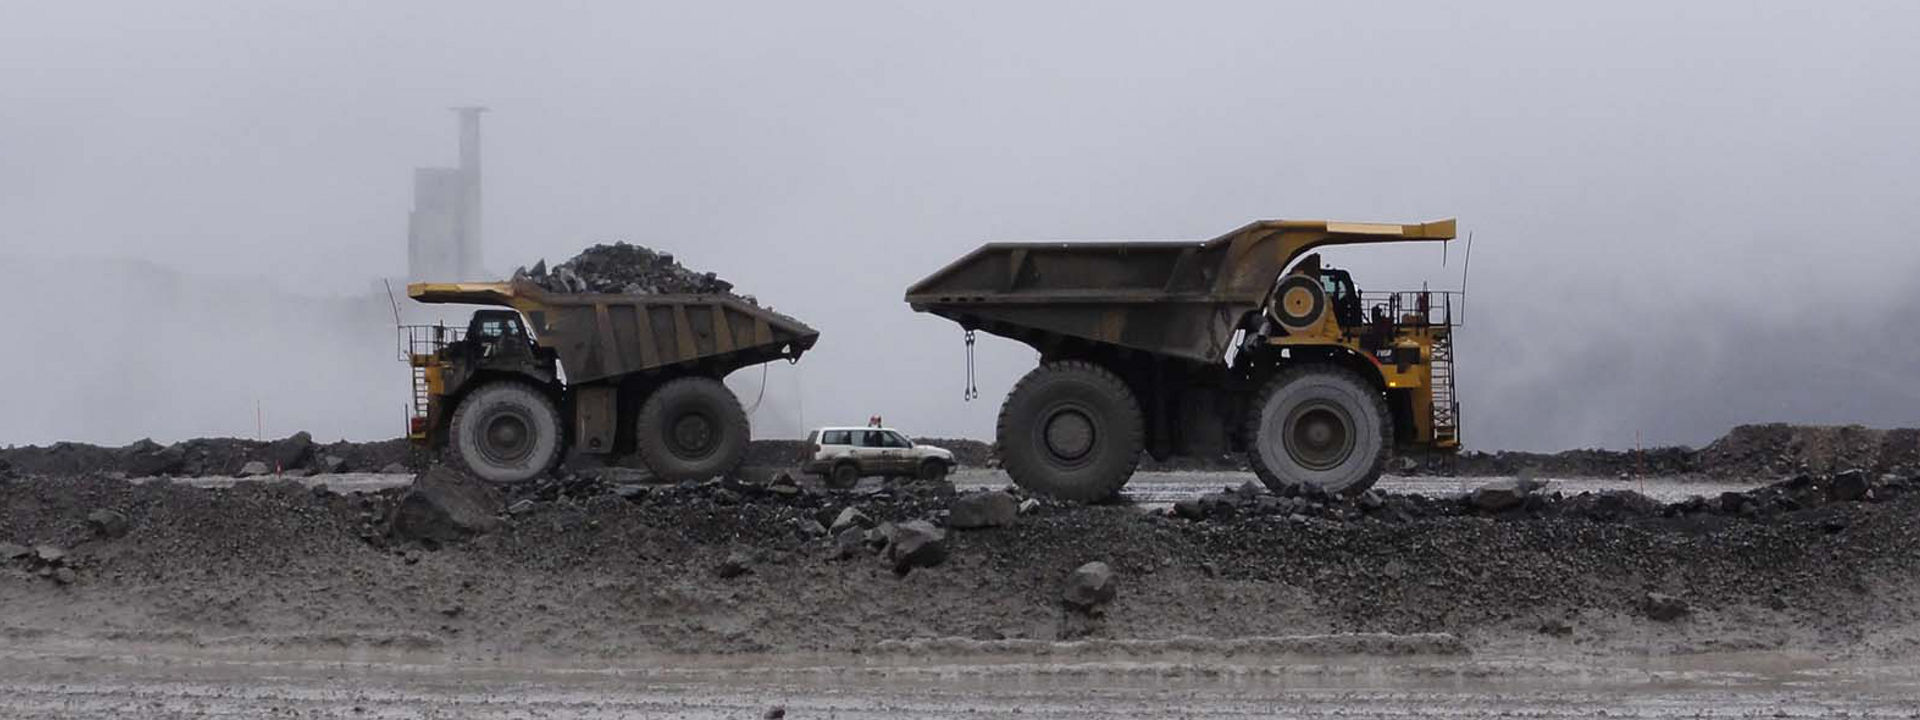 Four off-the-road vehicles equipped with Bridgestone tyres working in an open pit mine